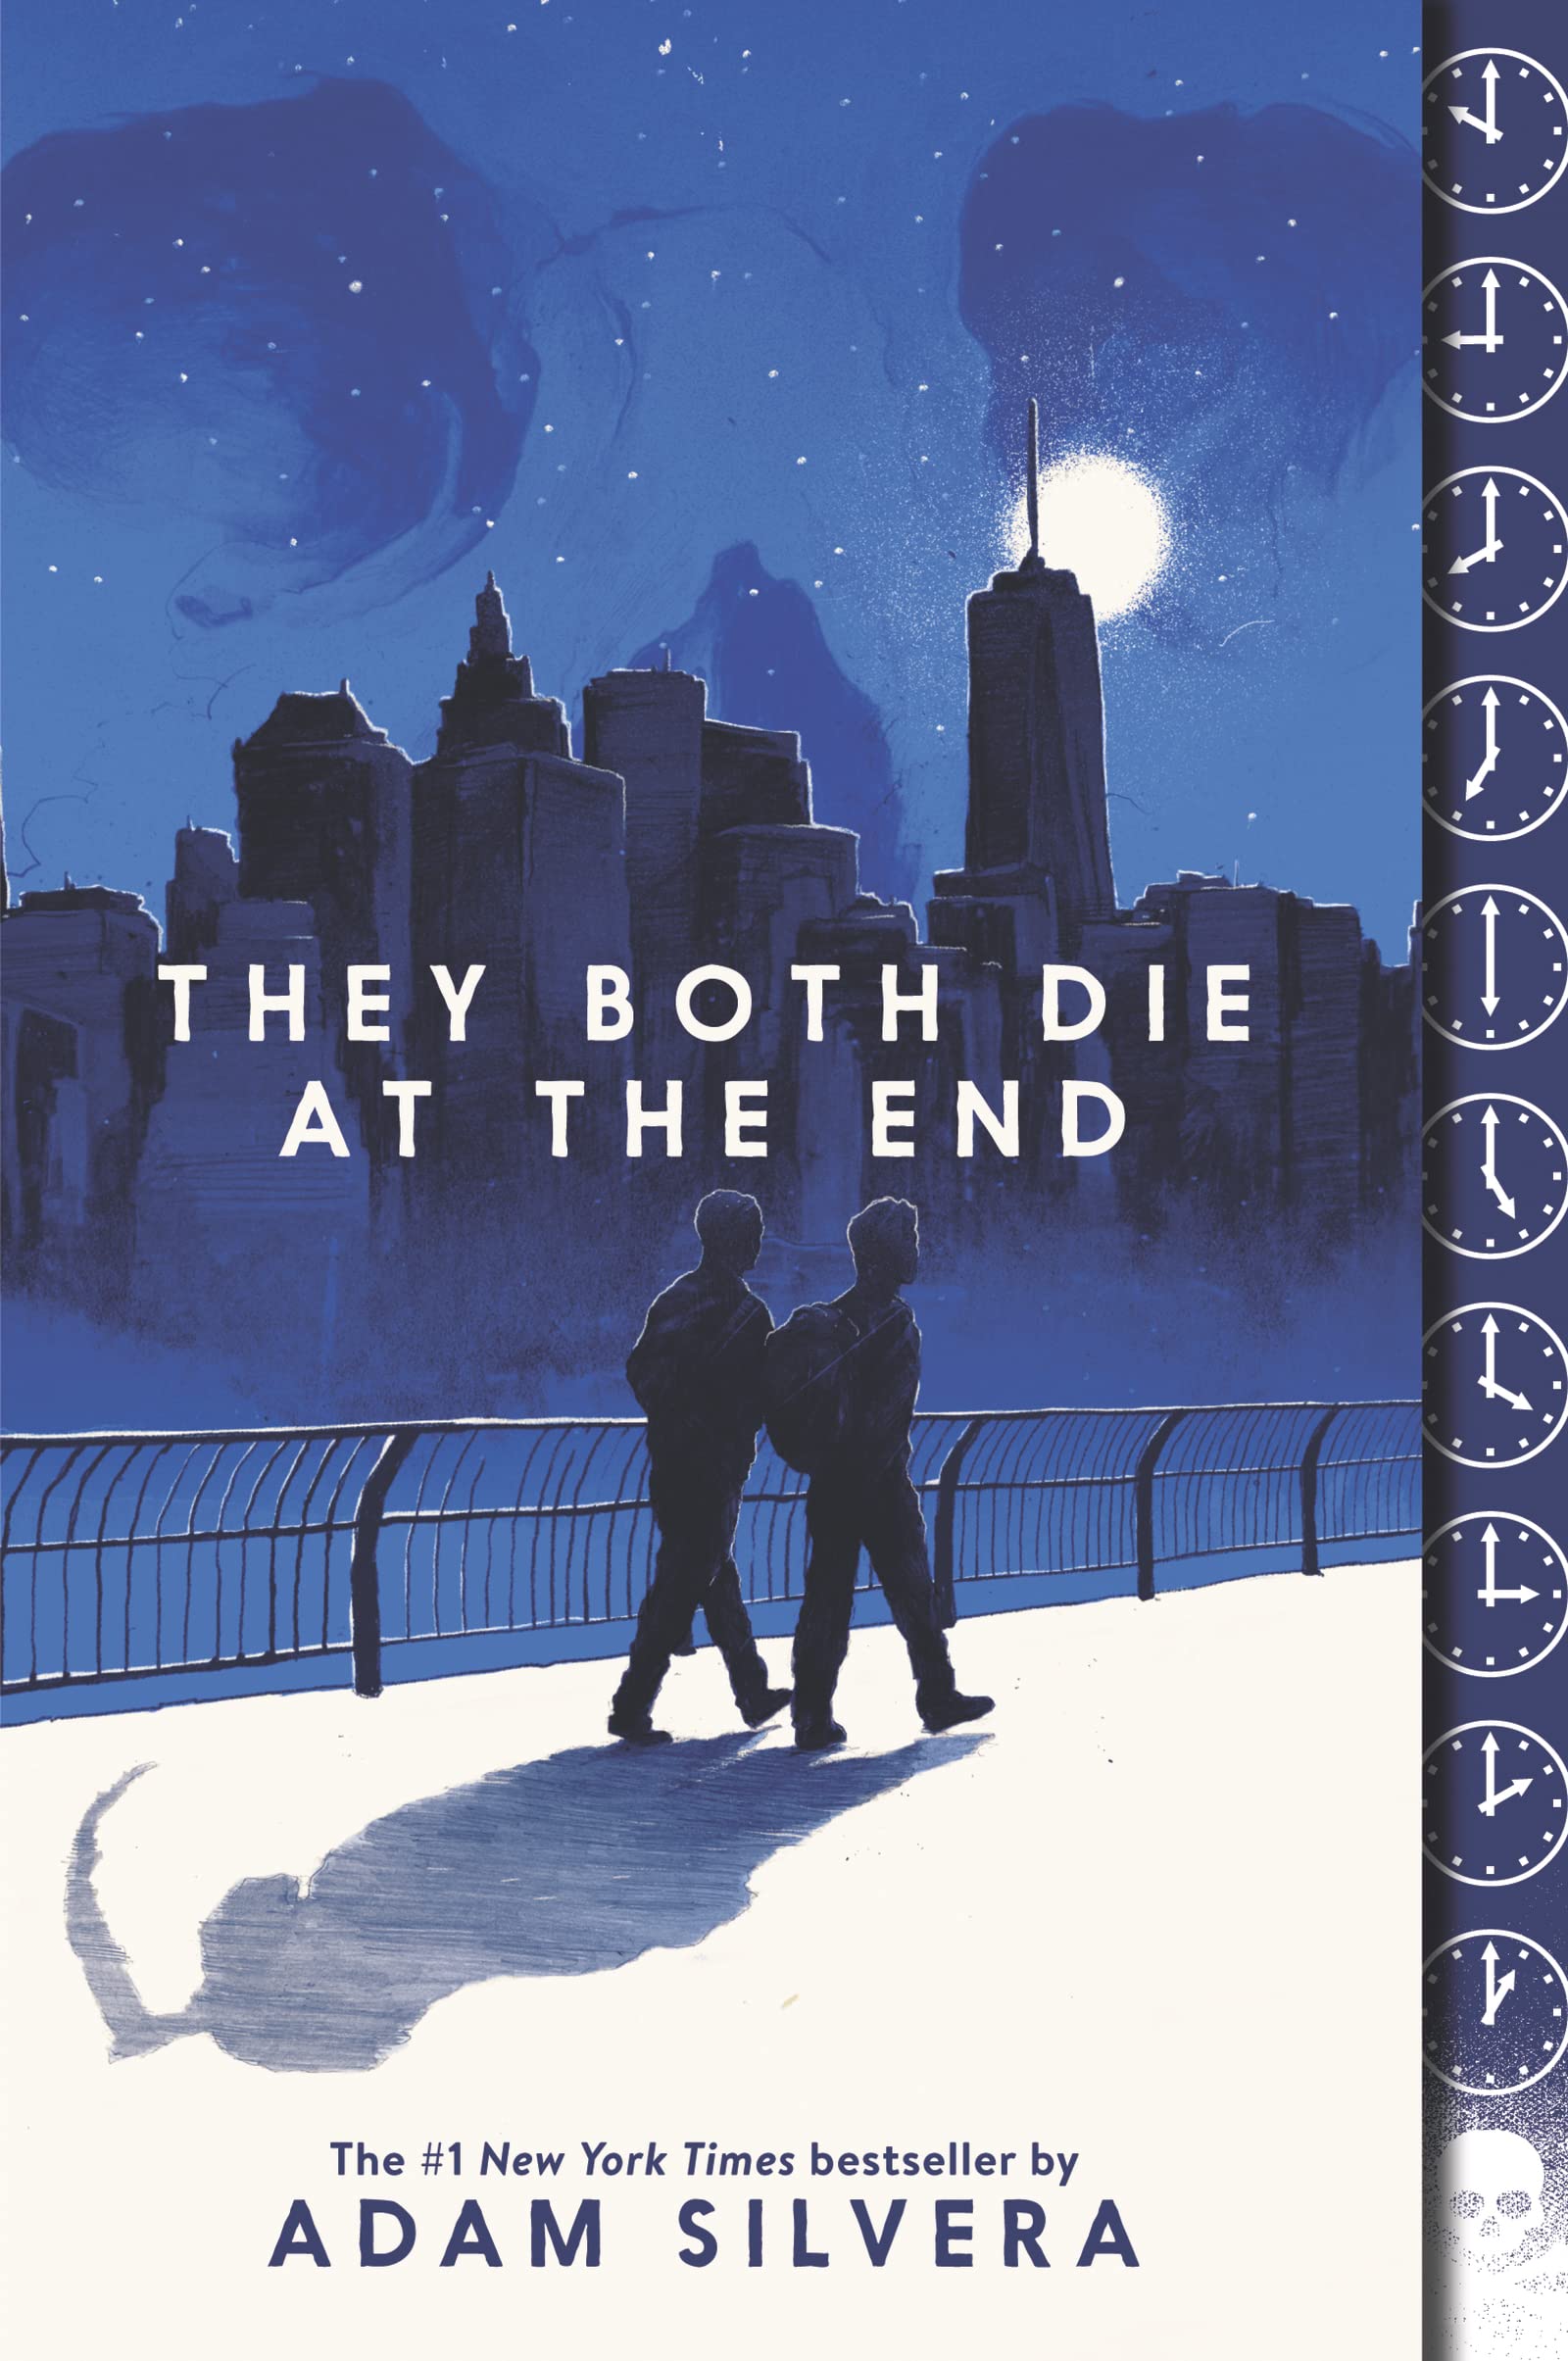 Summer Reads: They Both Die at the End